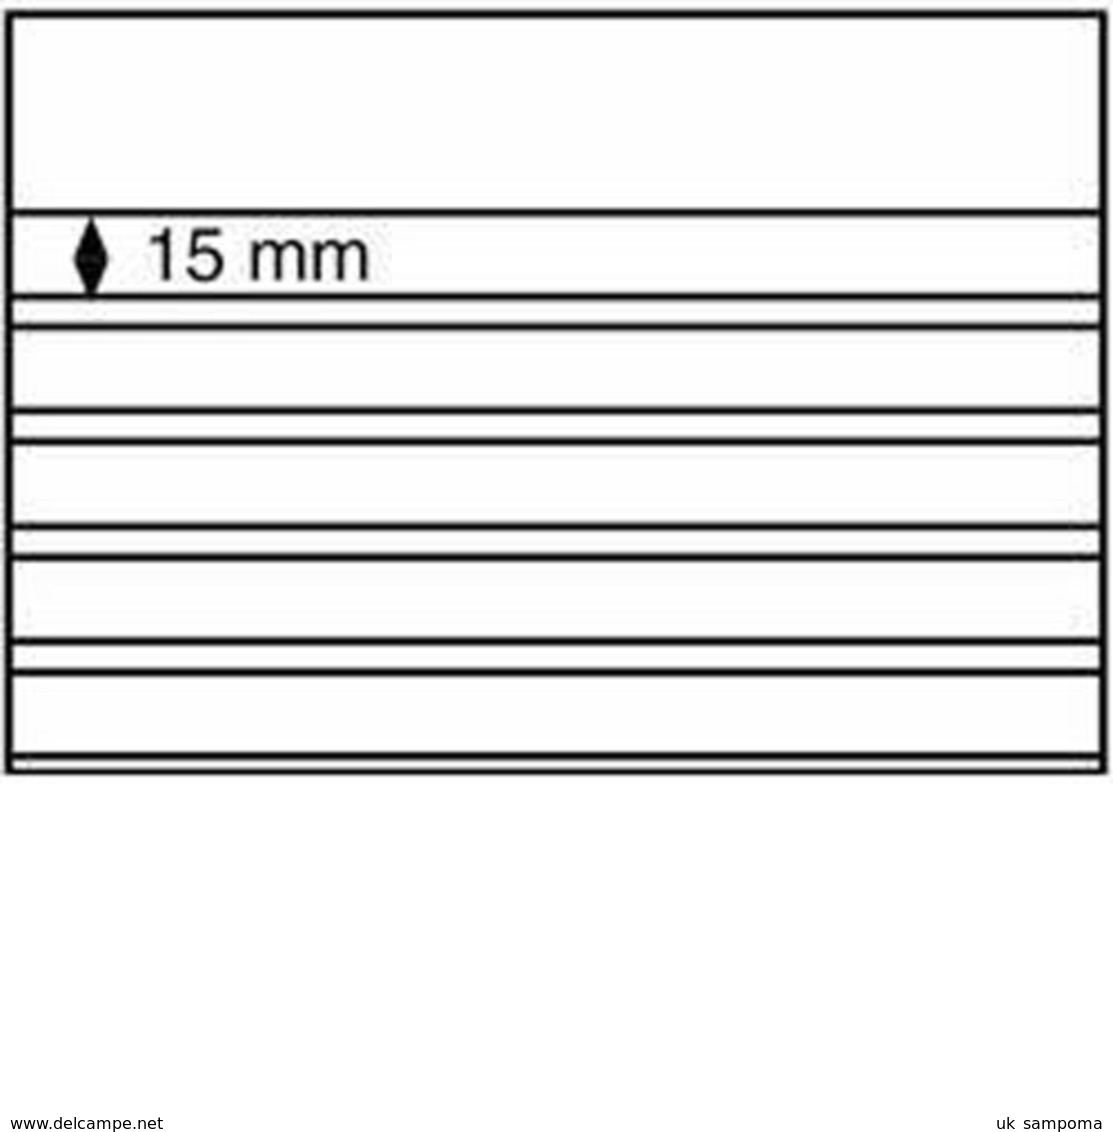 Standard Cards PS 210x148 Mm, 5 Clear Strips With Cover Sheet, Black Card, 50 Per Pack - Stock Sheets